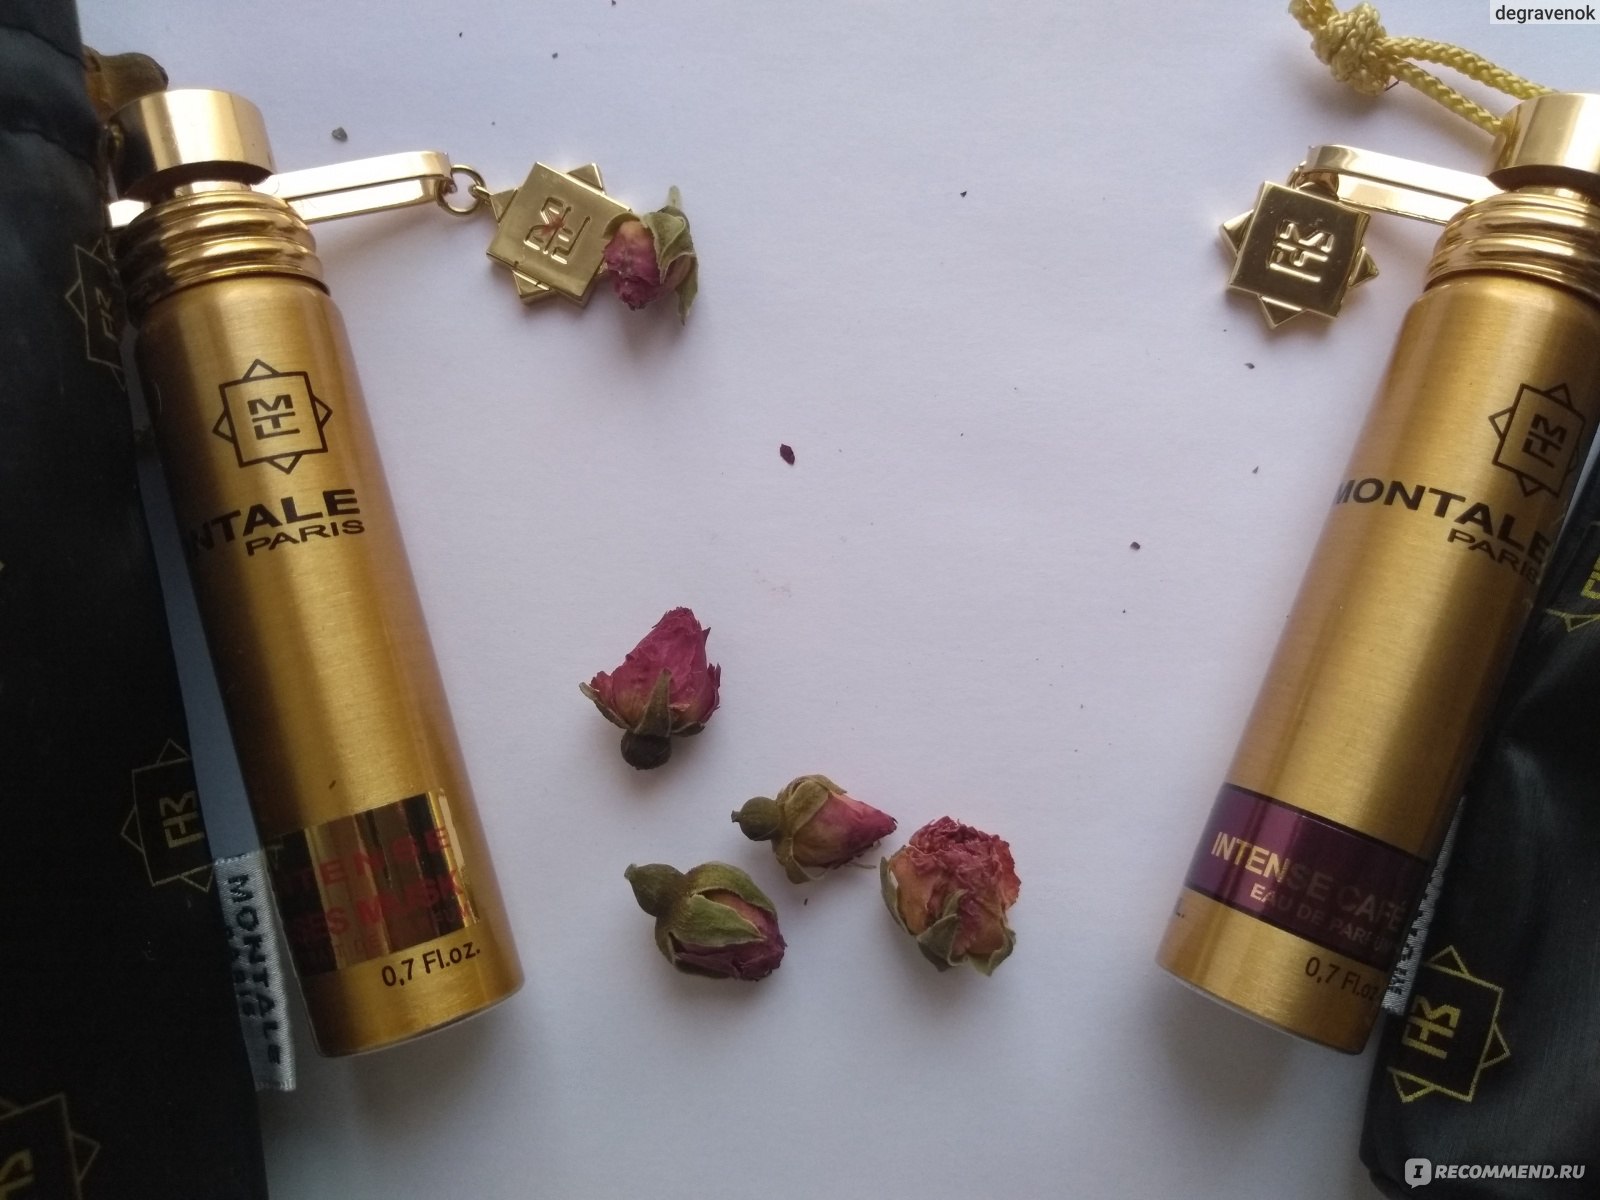 Montale intense roses